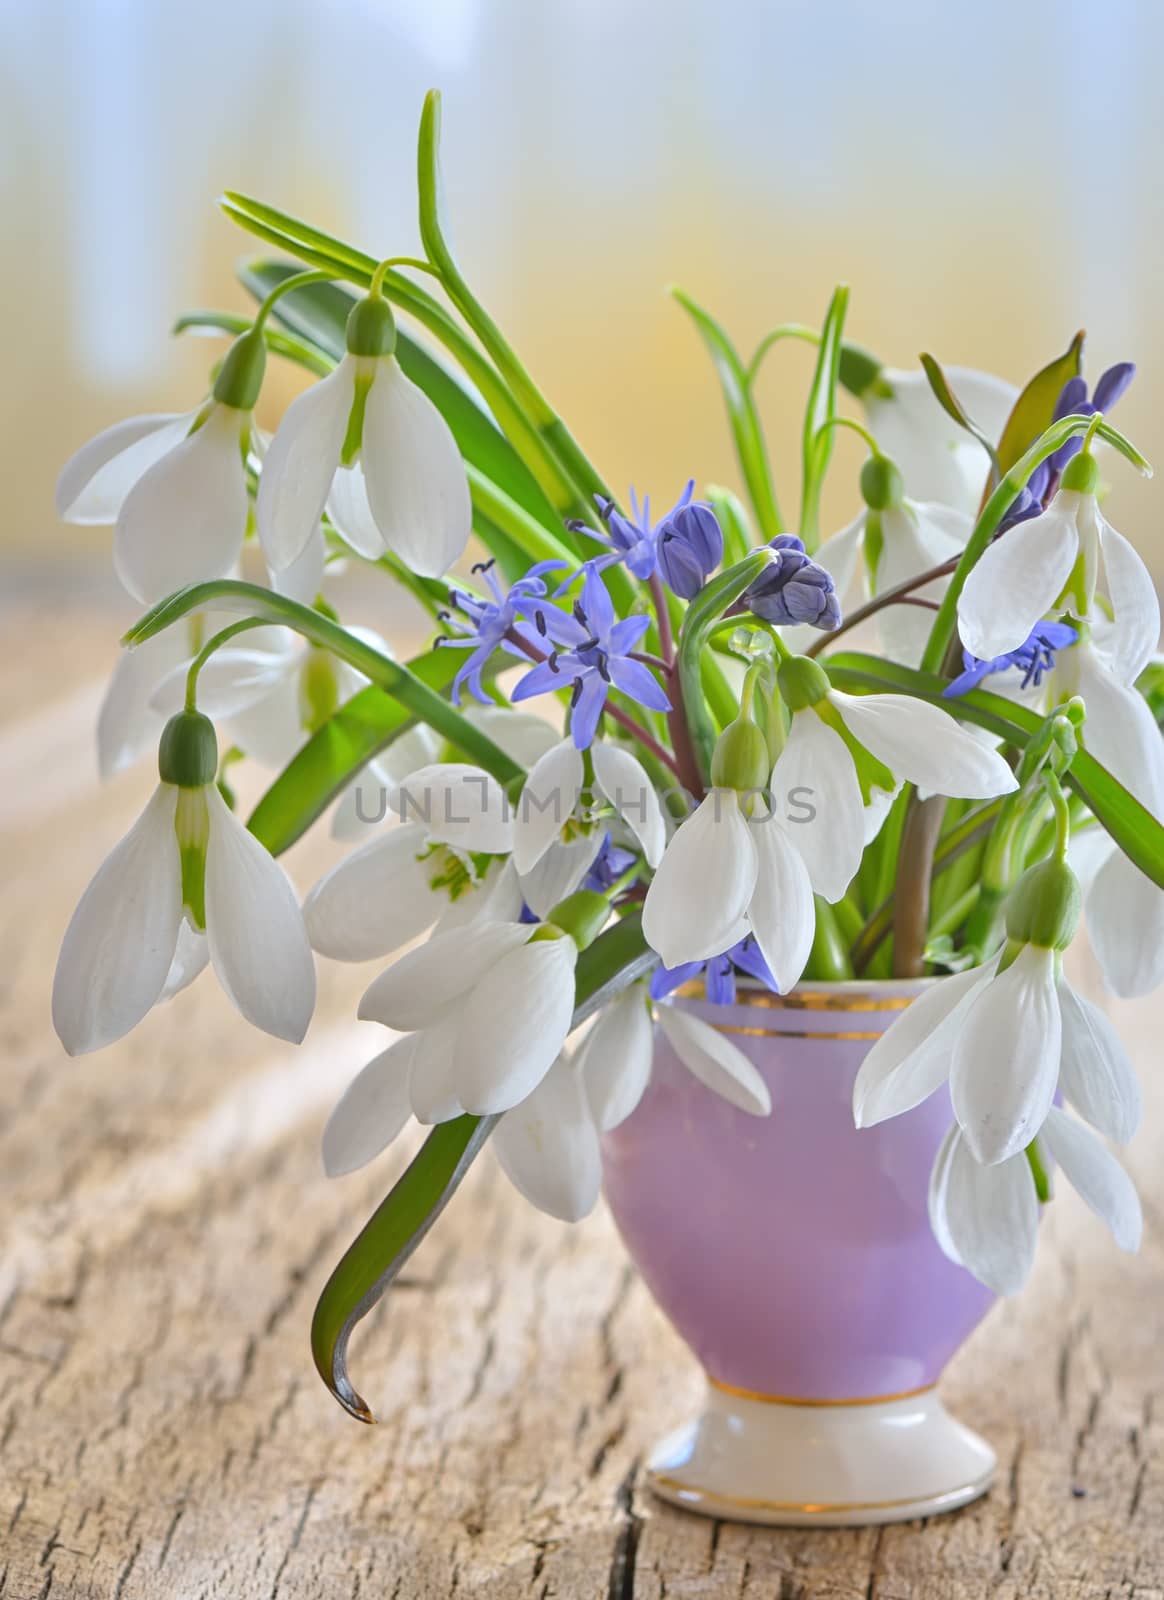 Beautiful bouquet of snowdrops in vase by mady70